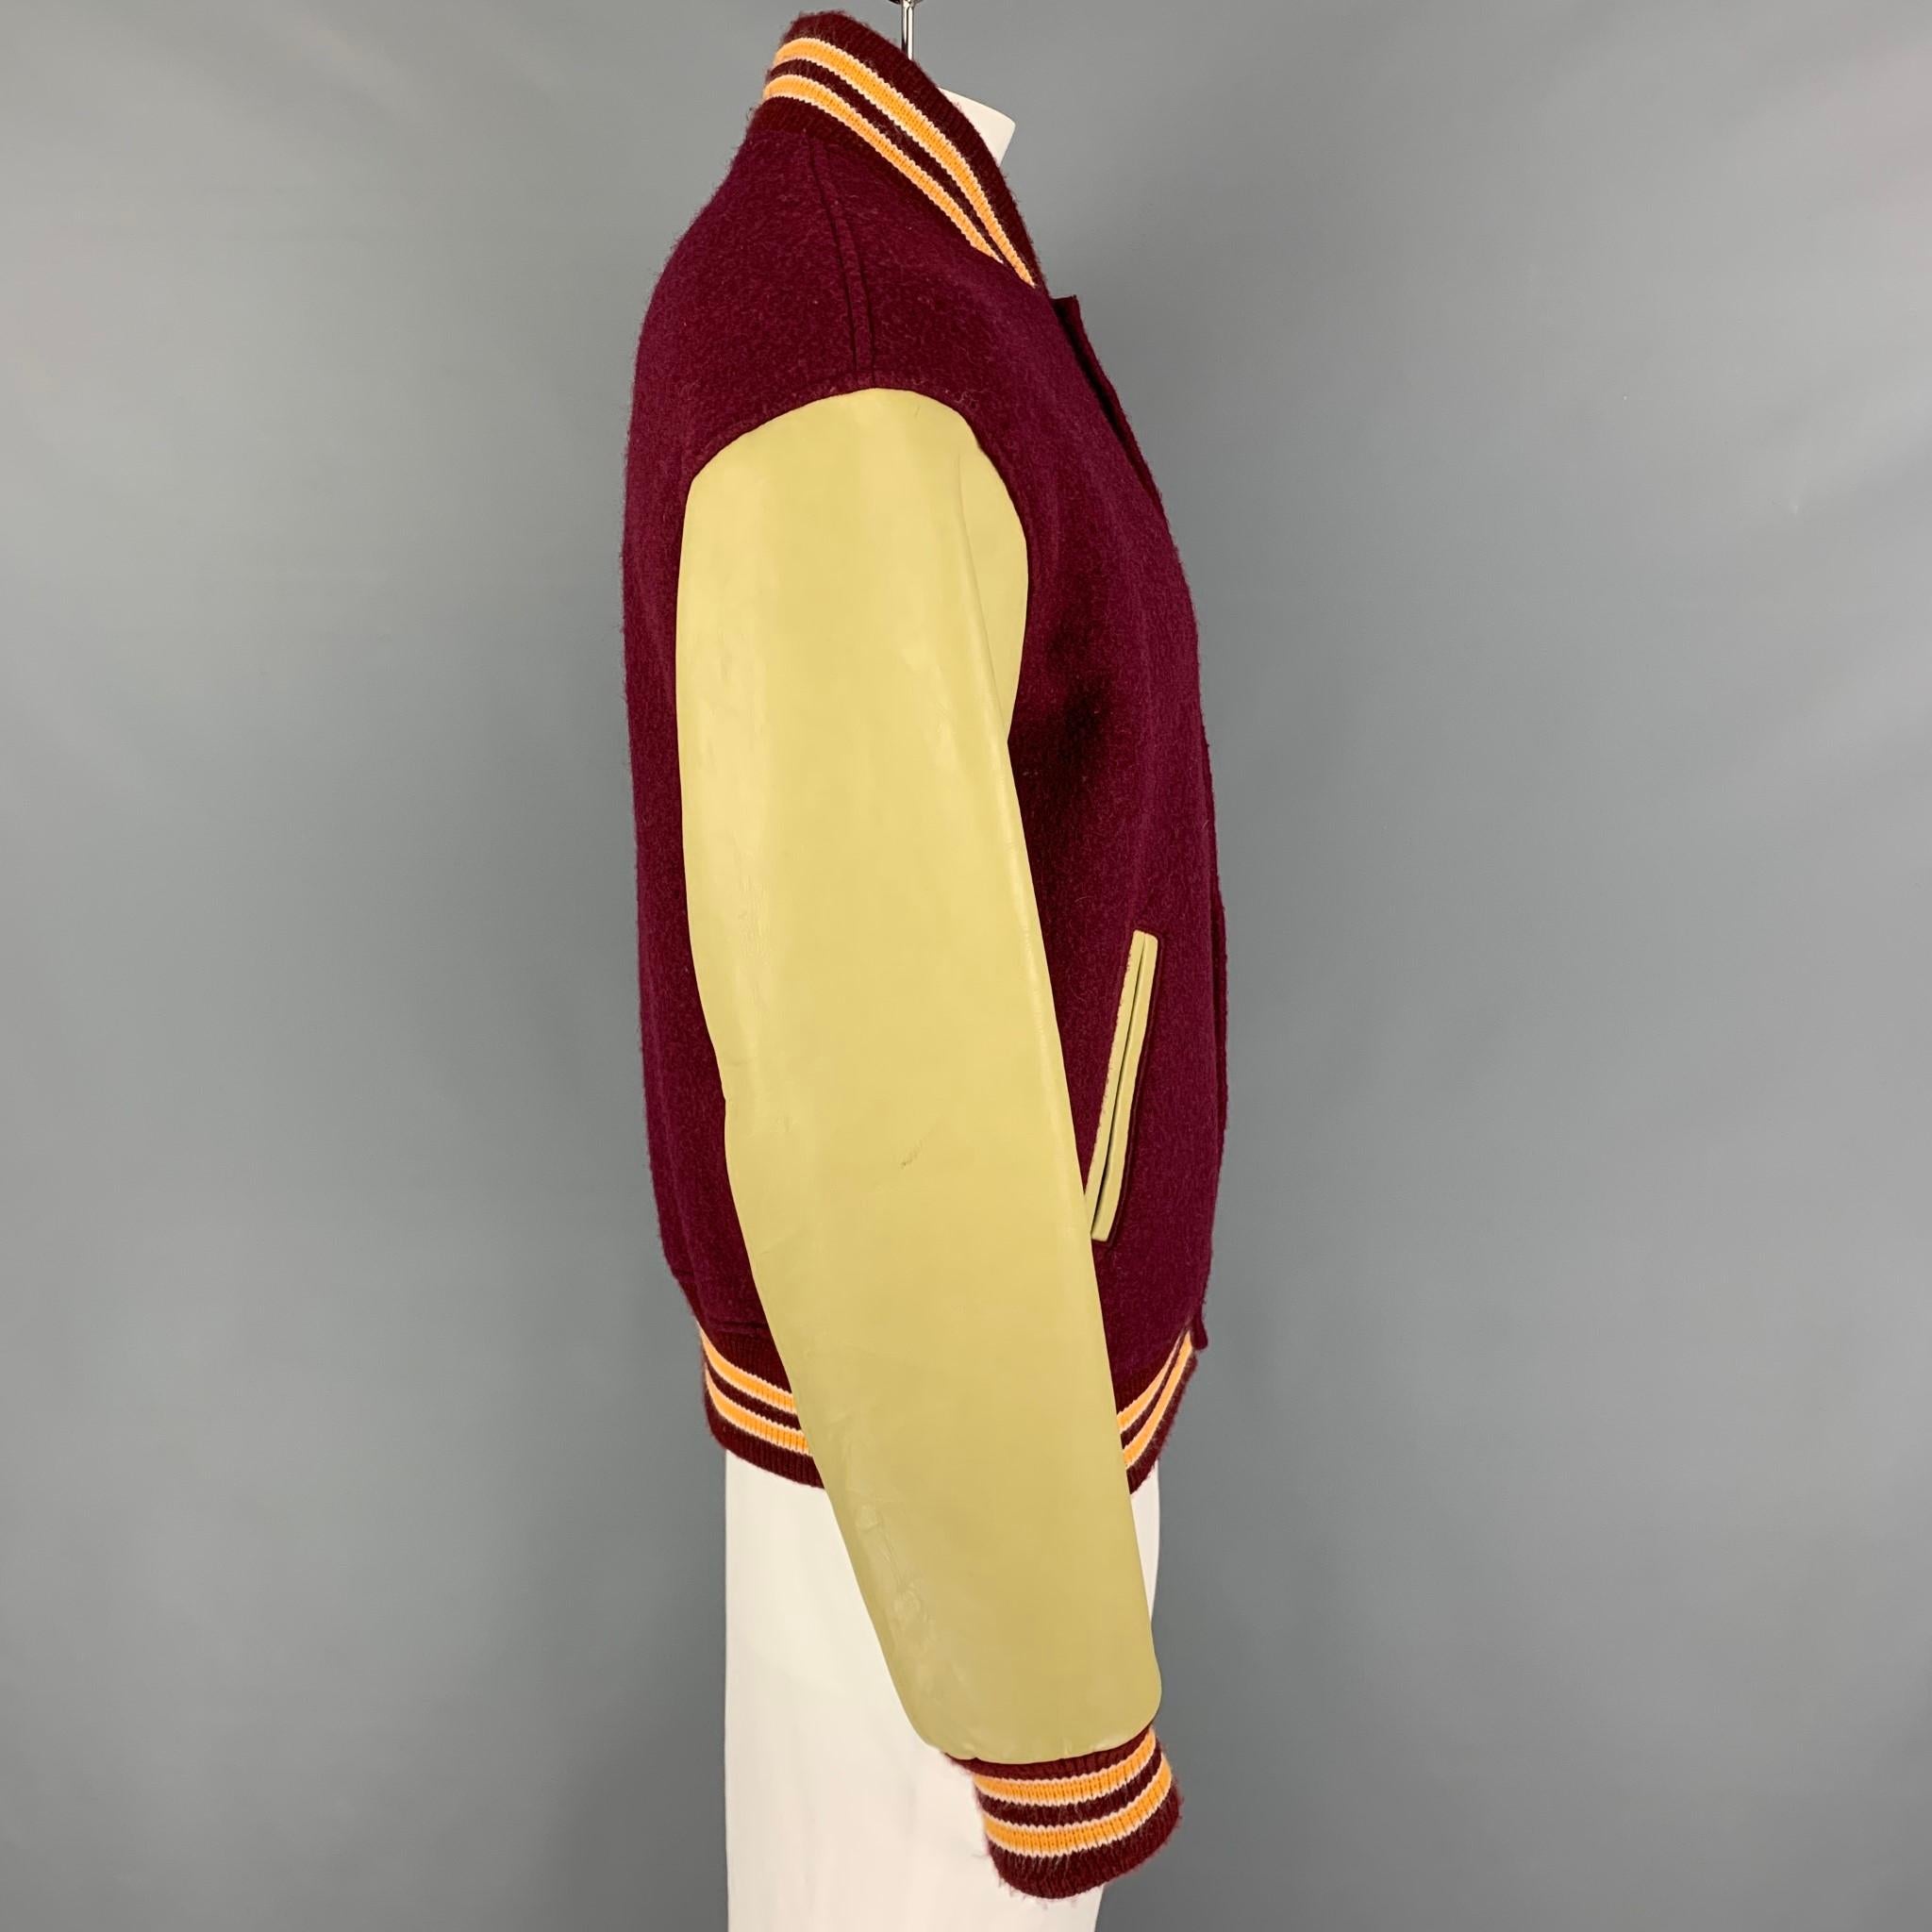 PRESIDENT's jacket comes in a burgundy & olive color block mixed materials featuring a varsity style, leather sleeves, ribbed hem, slit pockets, and a snap button closure. Made in Italy. 

Very Good Pre-Owned Condition.
Marked: